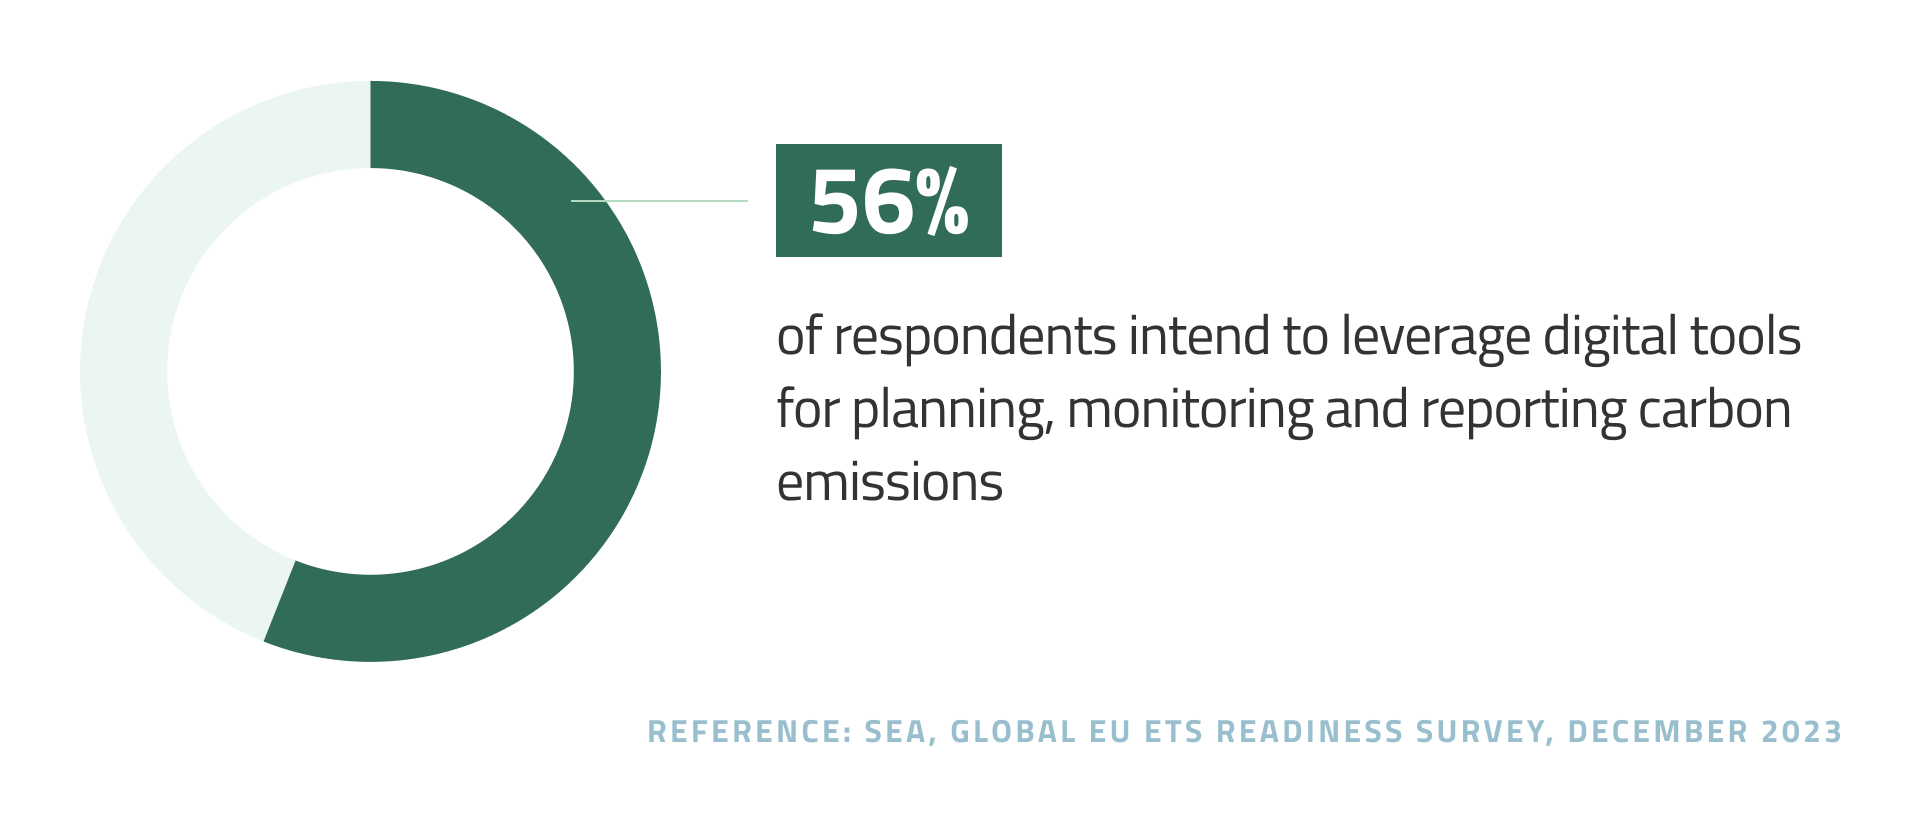 Intent to leverage digital tools for planning, monitoring and reporting carbon emissions